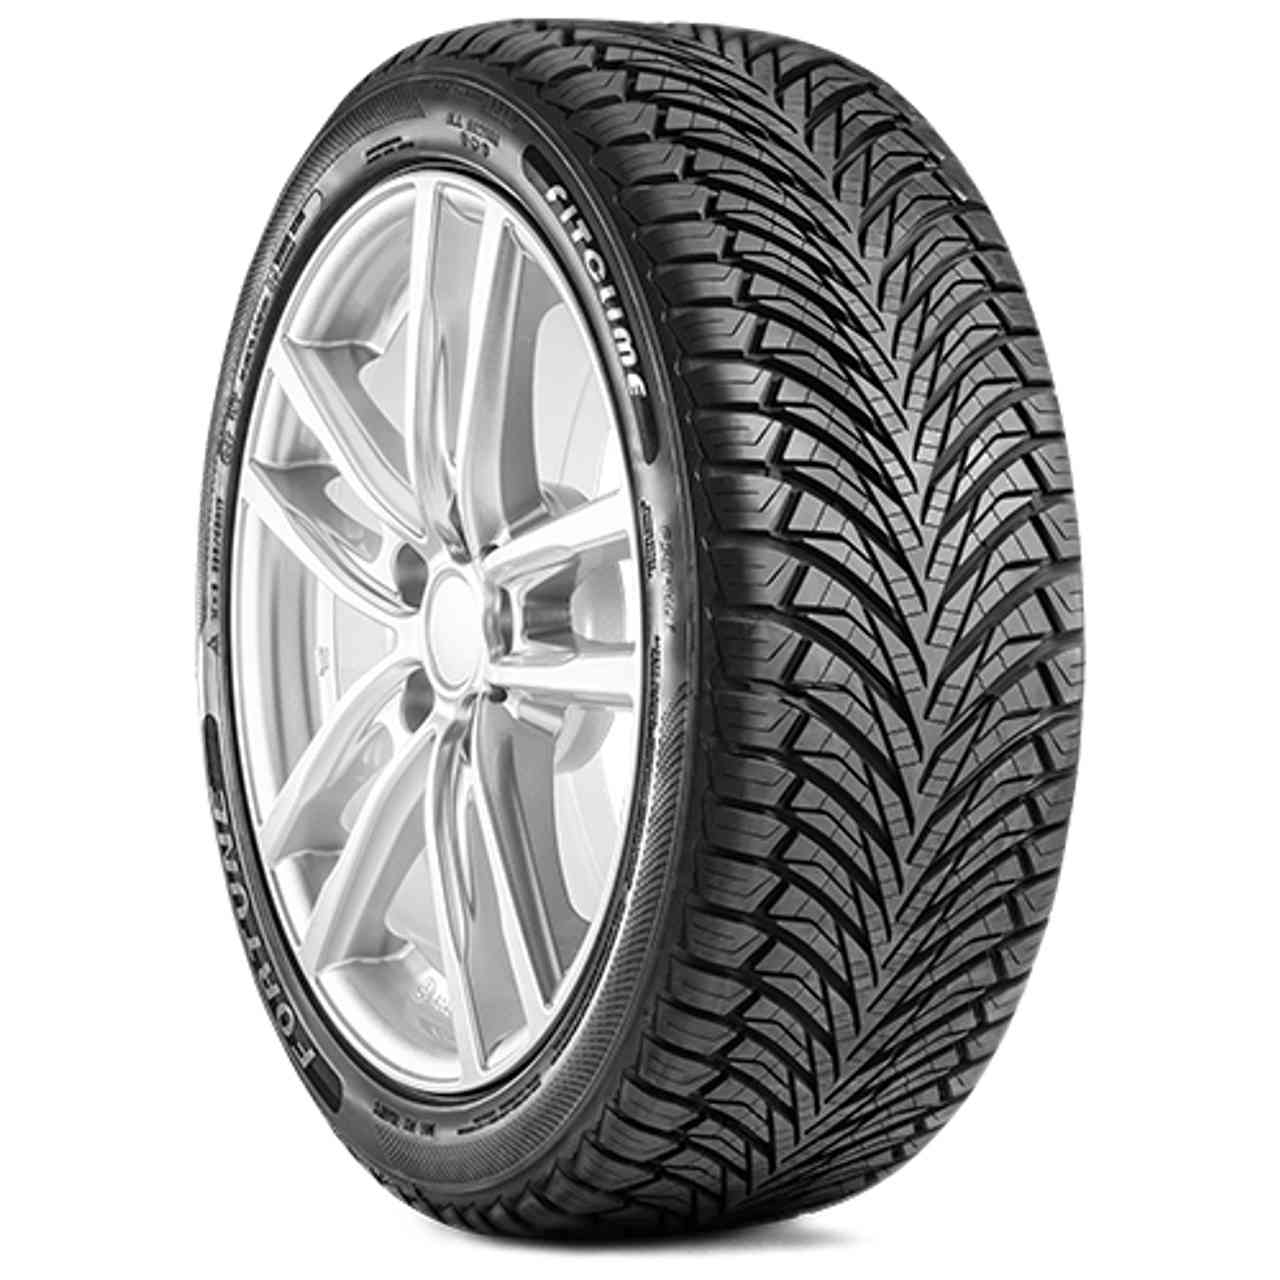 FORTUNE FITCLIME FSR-401 195/65R15 95V BSW